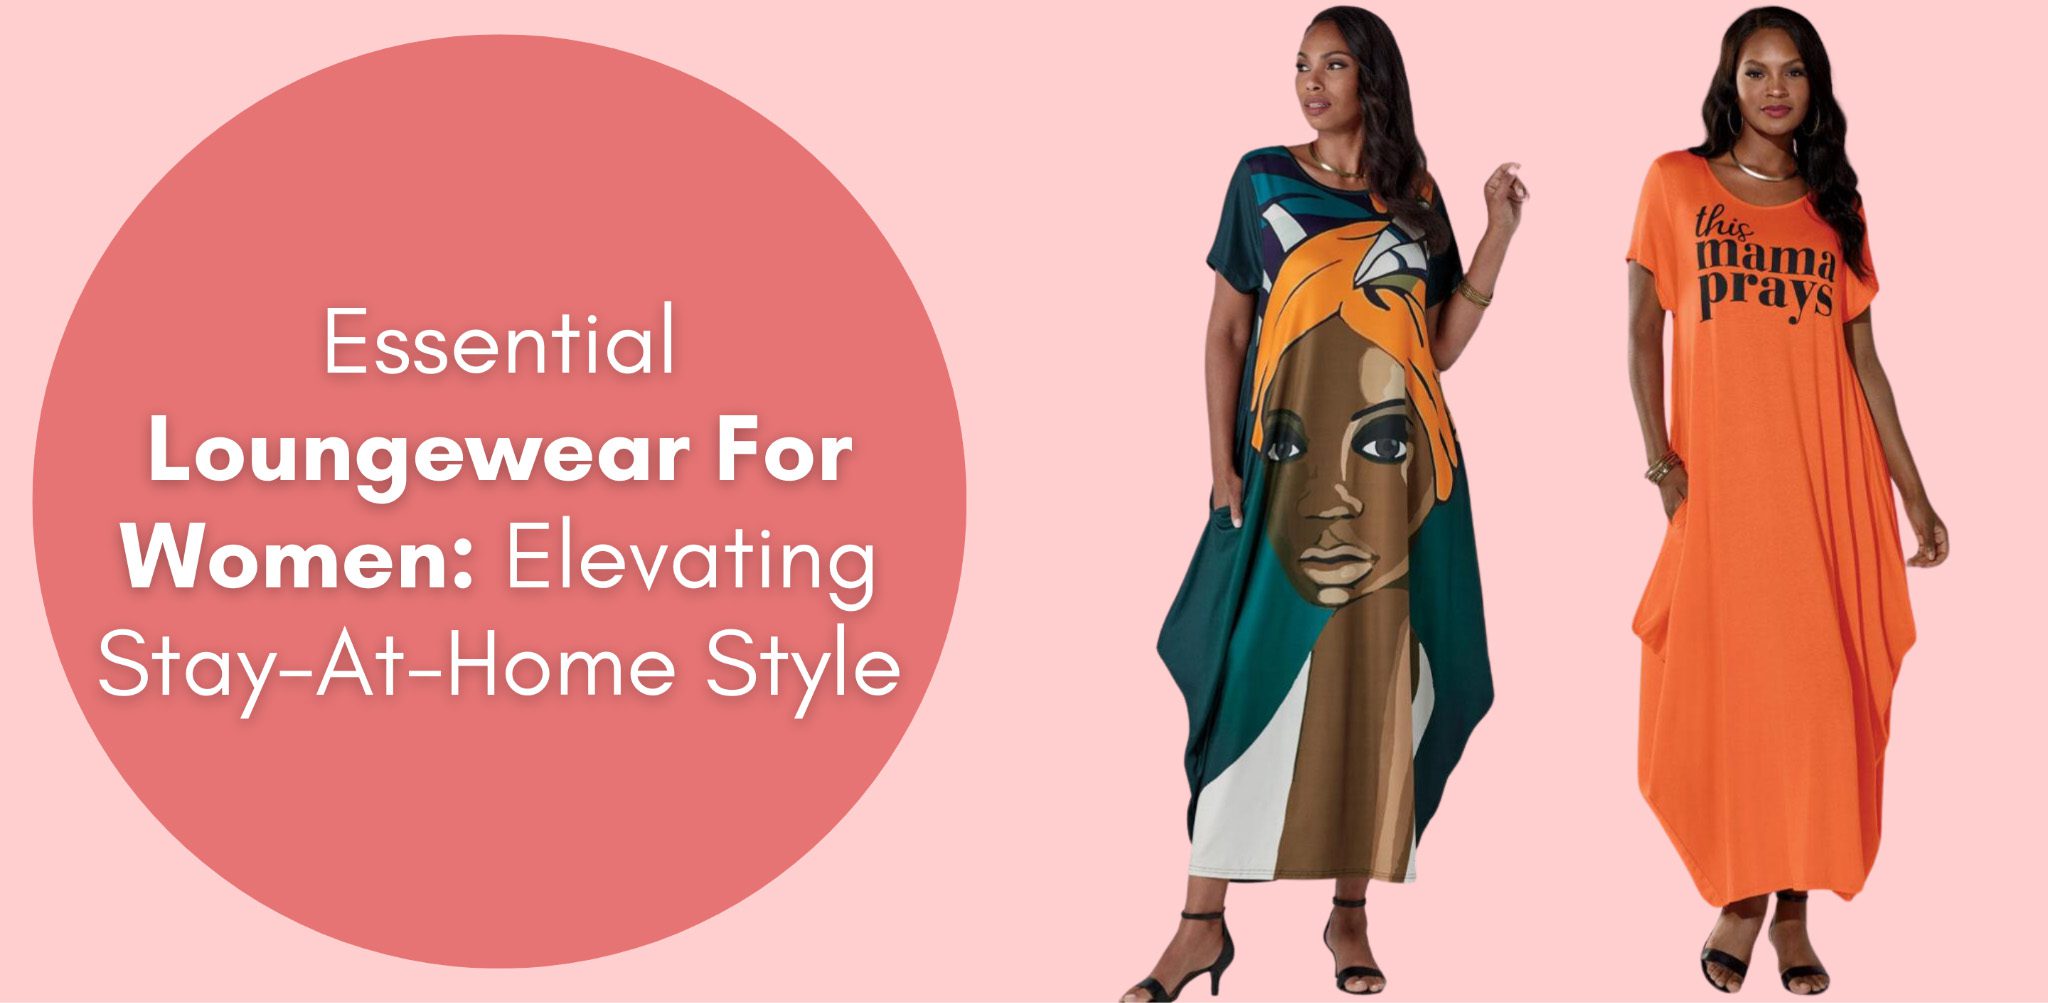 Essential Loungewear For Women: Elevating Stay-At-Home Style